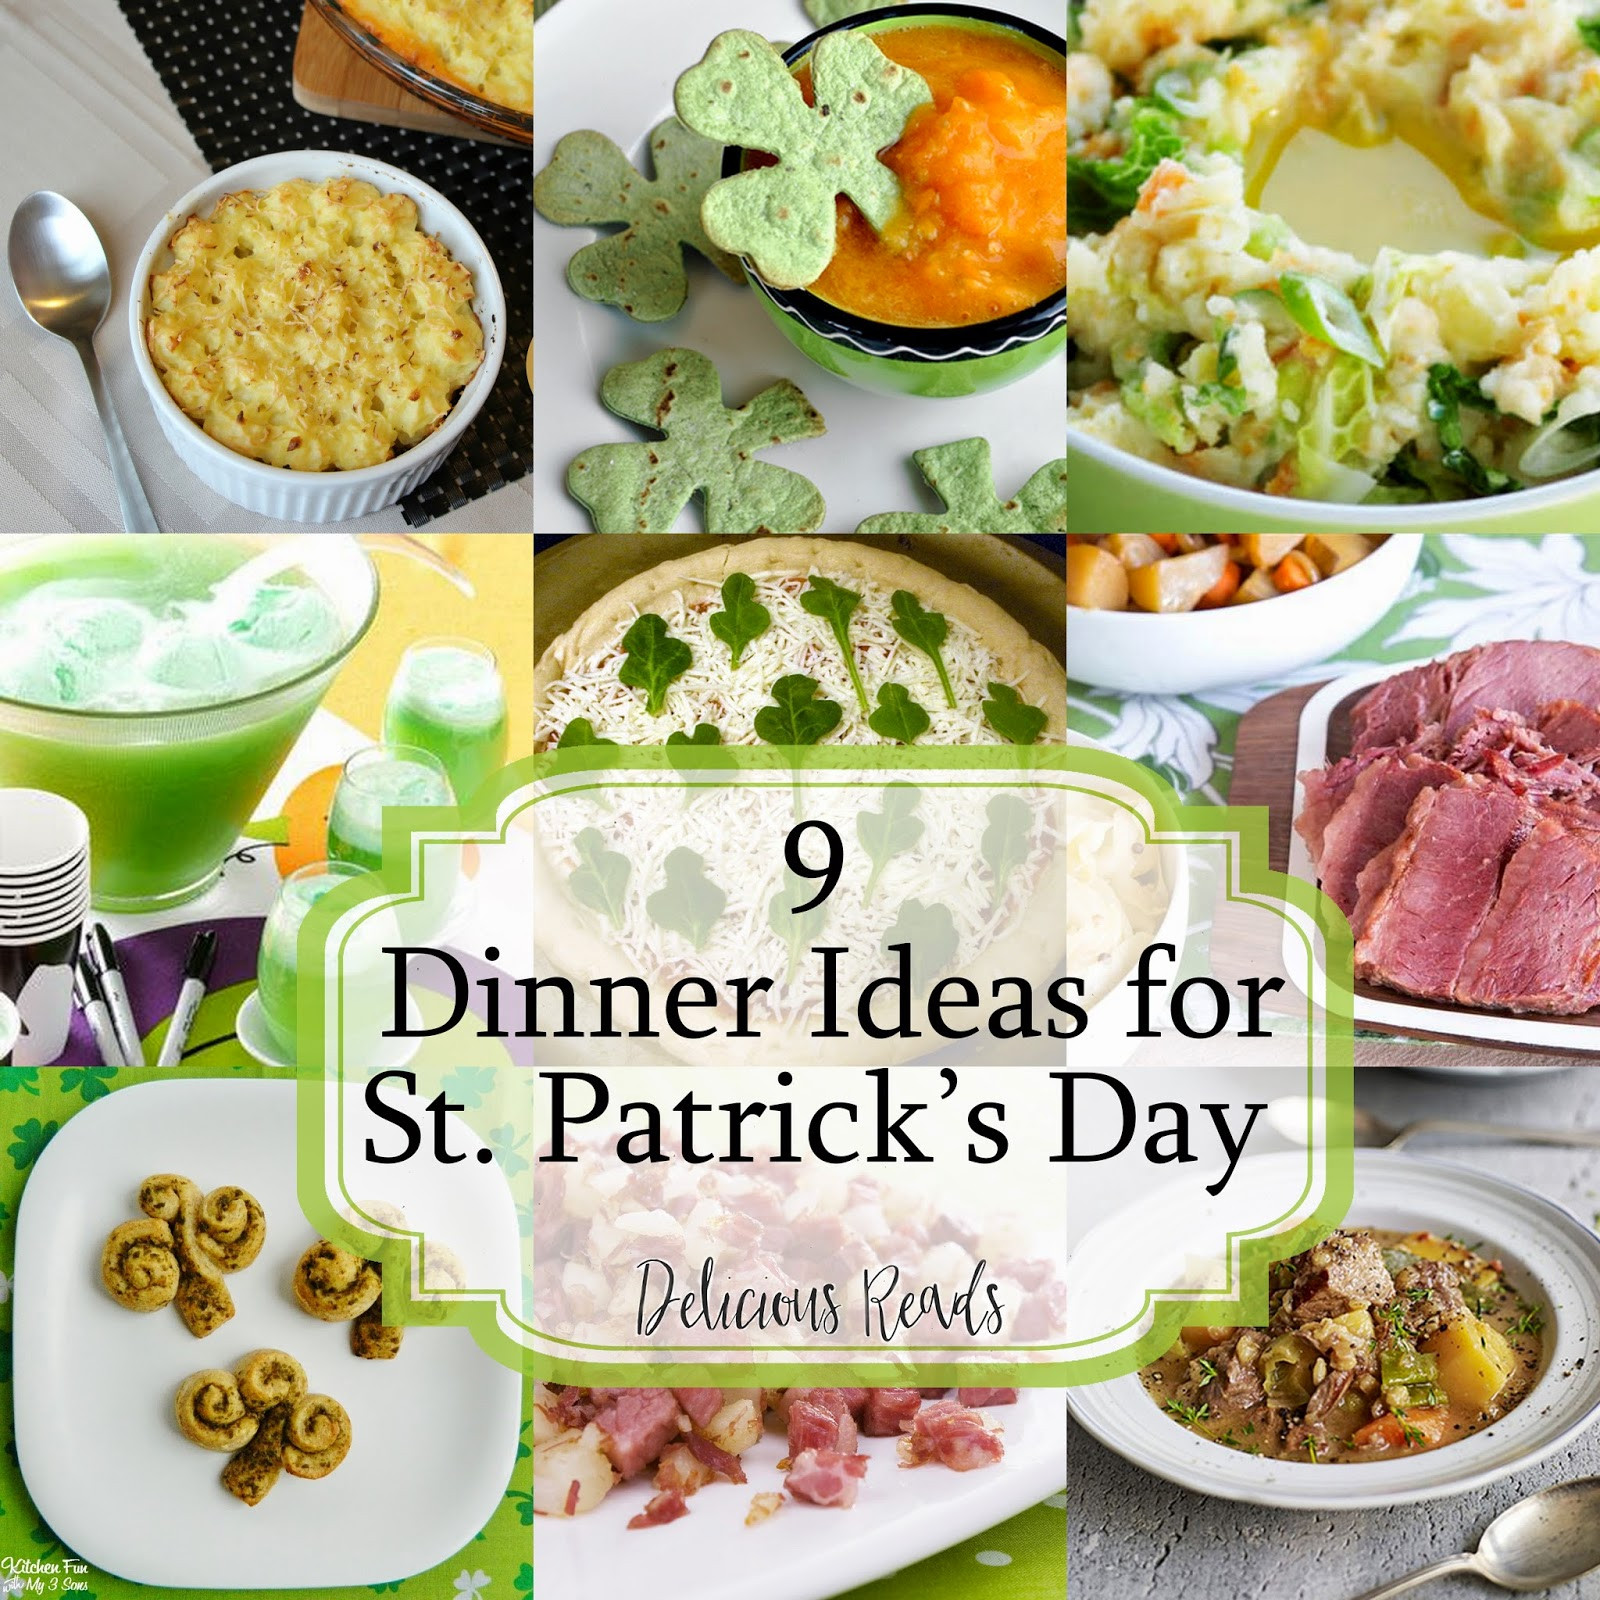 St Patricks Day Dinners
 Delicious Reads 9 Easy Irish Foods for St Patrick s Day